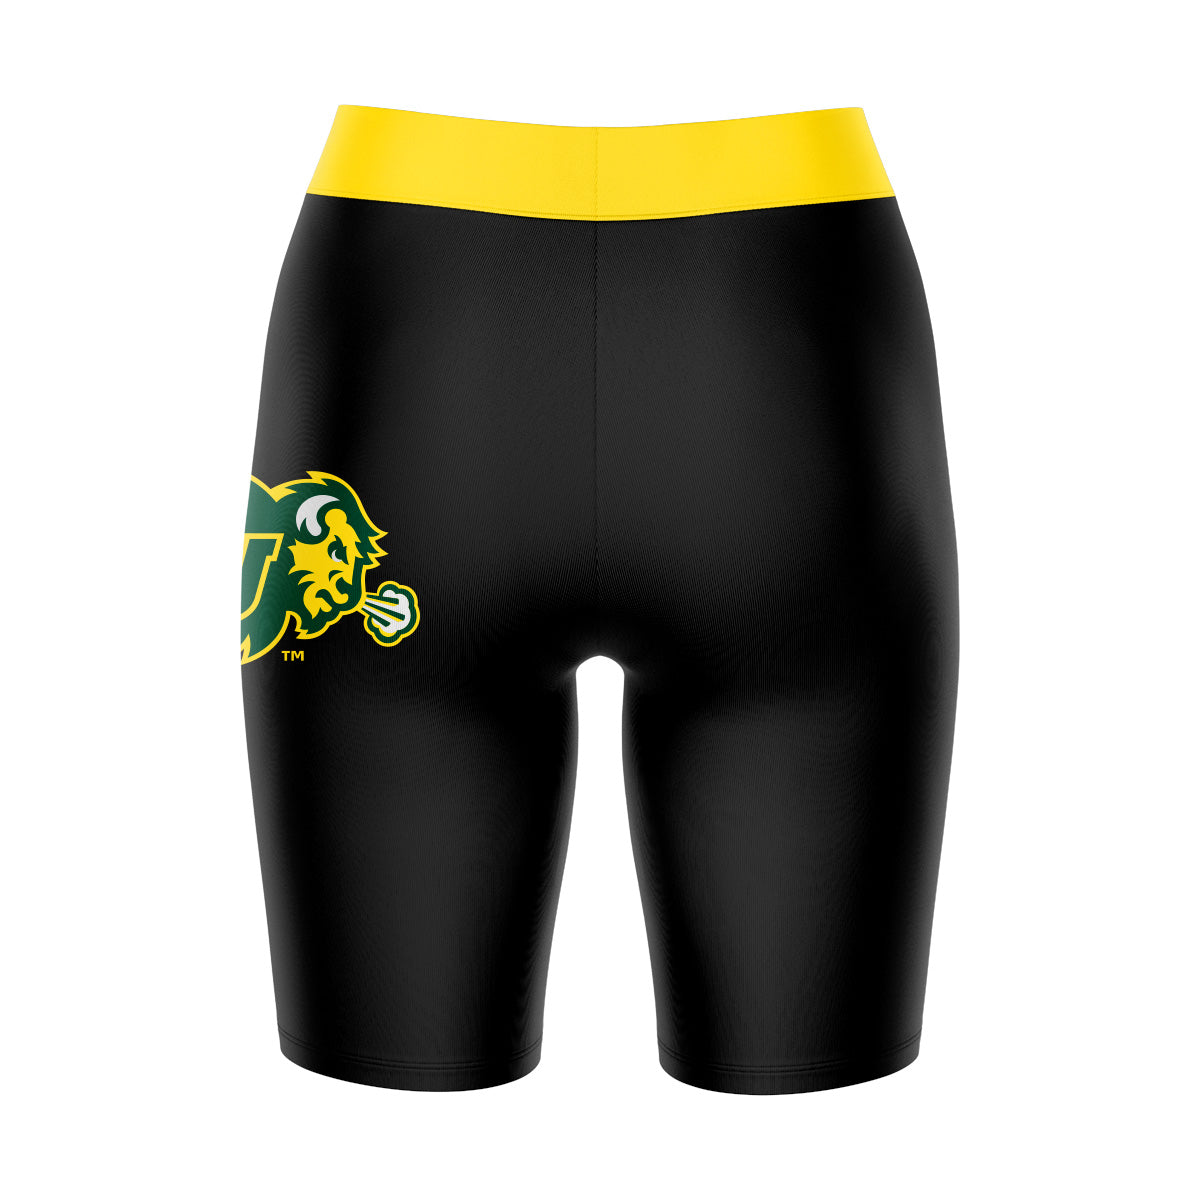 NDSU Bison Vive La Fete Game Day Logo on Thigh and Waistband Black and Gold Women Bike Short 9 Inseam"